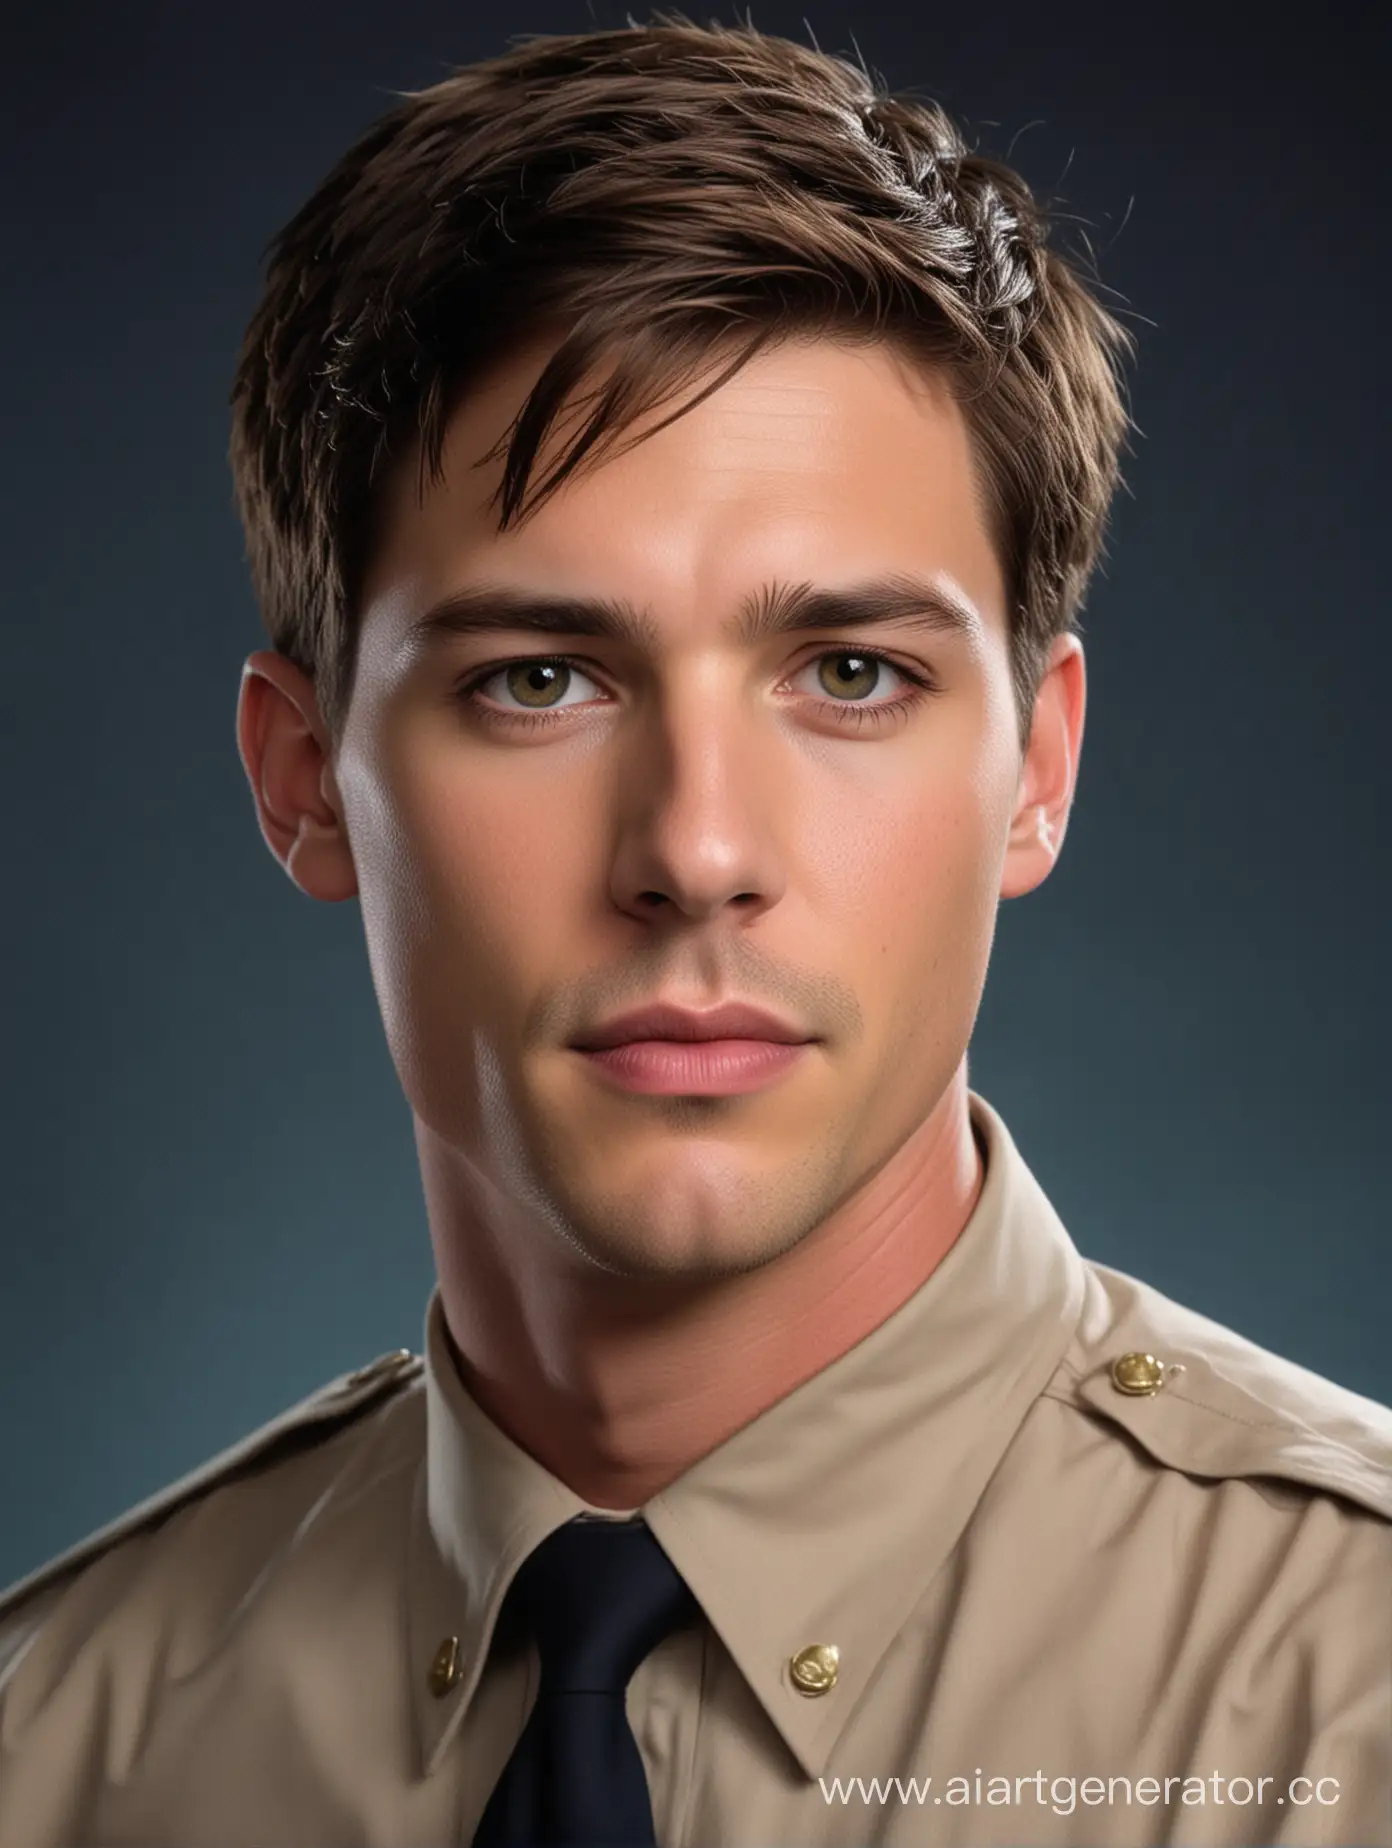 image of a man with short hair, slender brunette, handsome face, short haircut, expressive facial features, attractive, handsome, languid, dangerous appearance, twenty-five years old, looks like actor Brent Dougherty, dark eyes, clear full lips, FBI uniform, real lifestyle, light body and dark blue color on background, full-length, mesmerizing, realistic pictures, animated gif files -ar 71: 128 -Stylize 750 -v 6